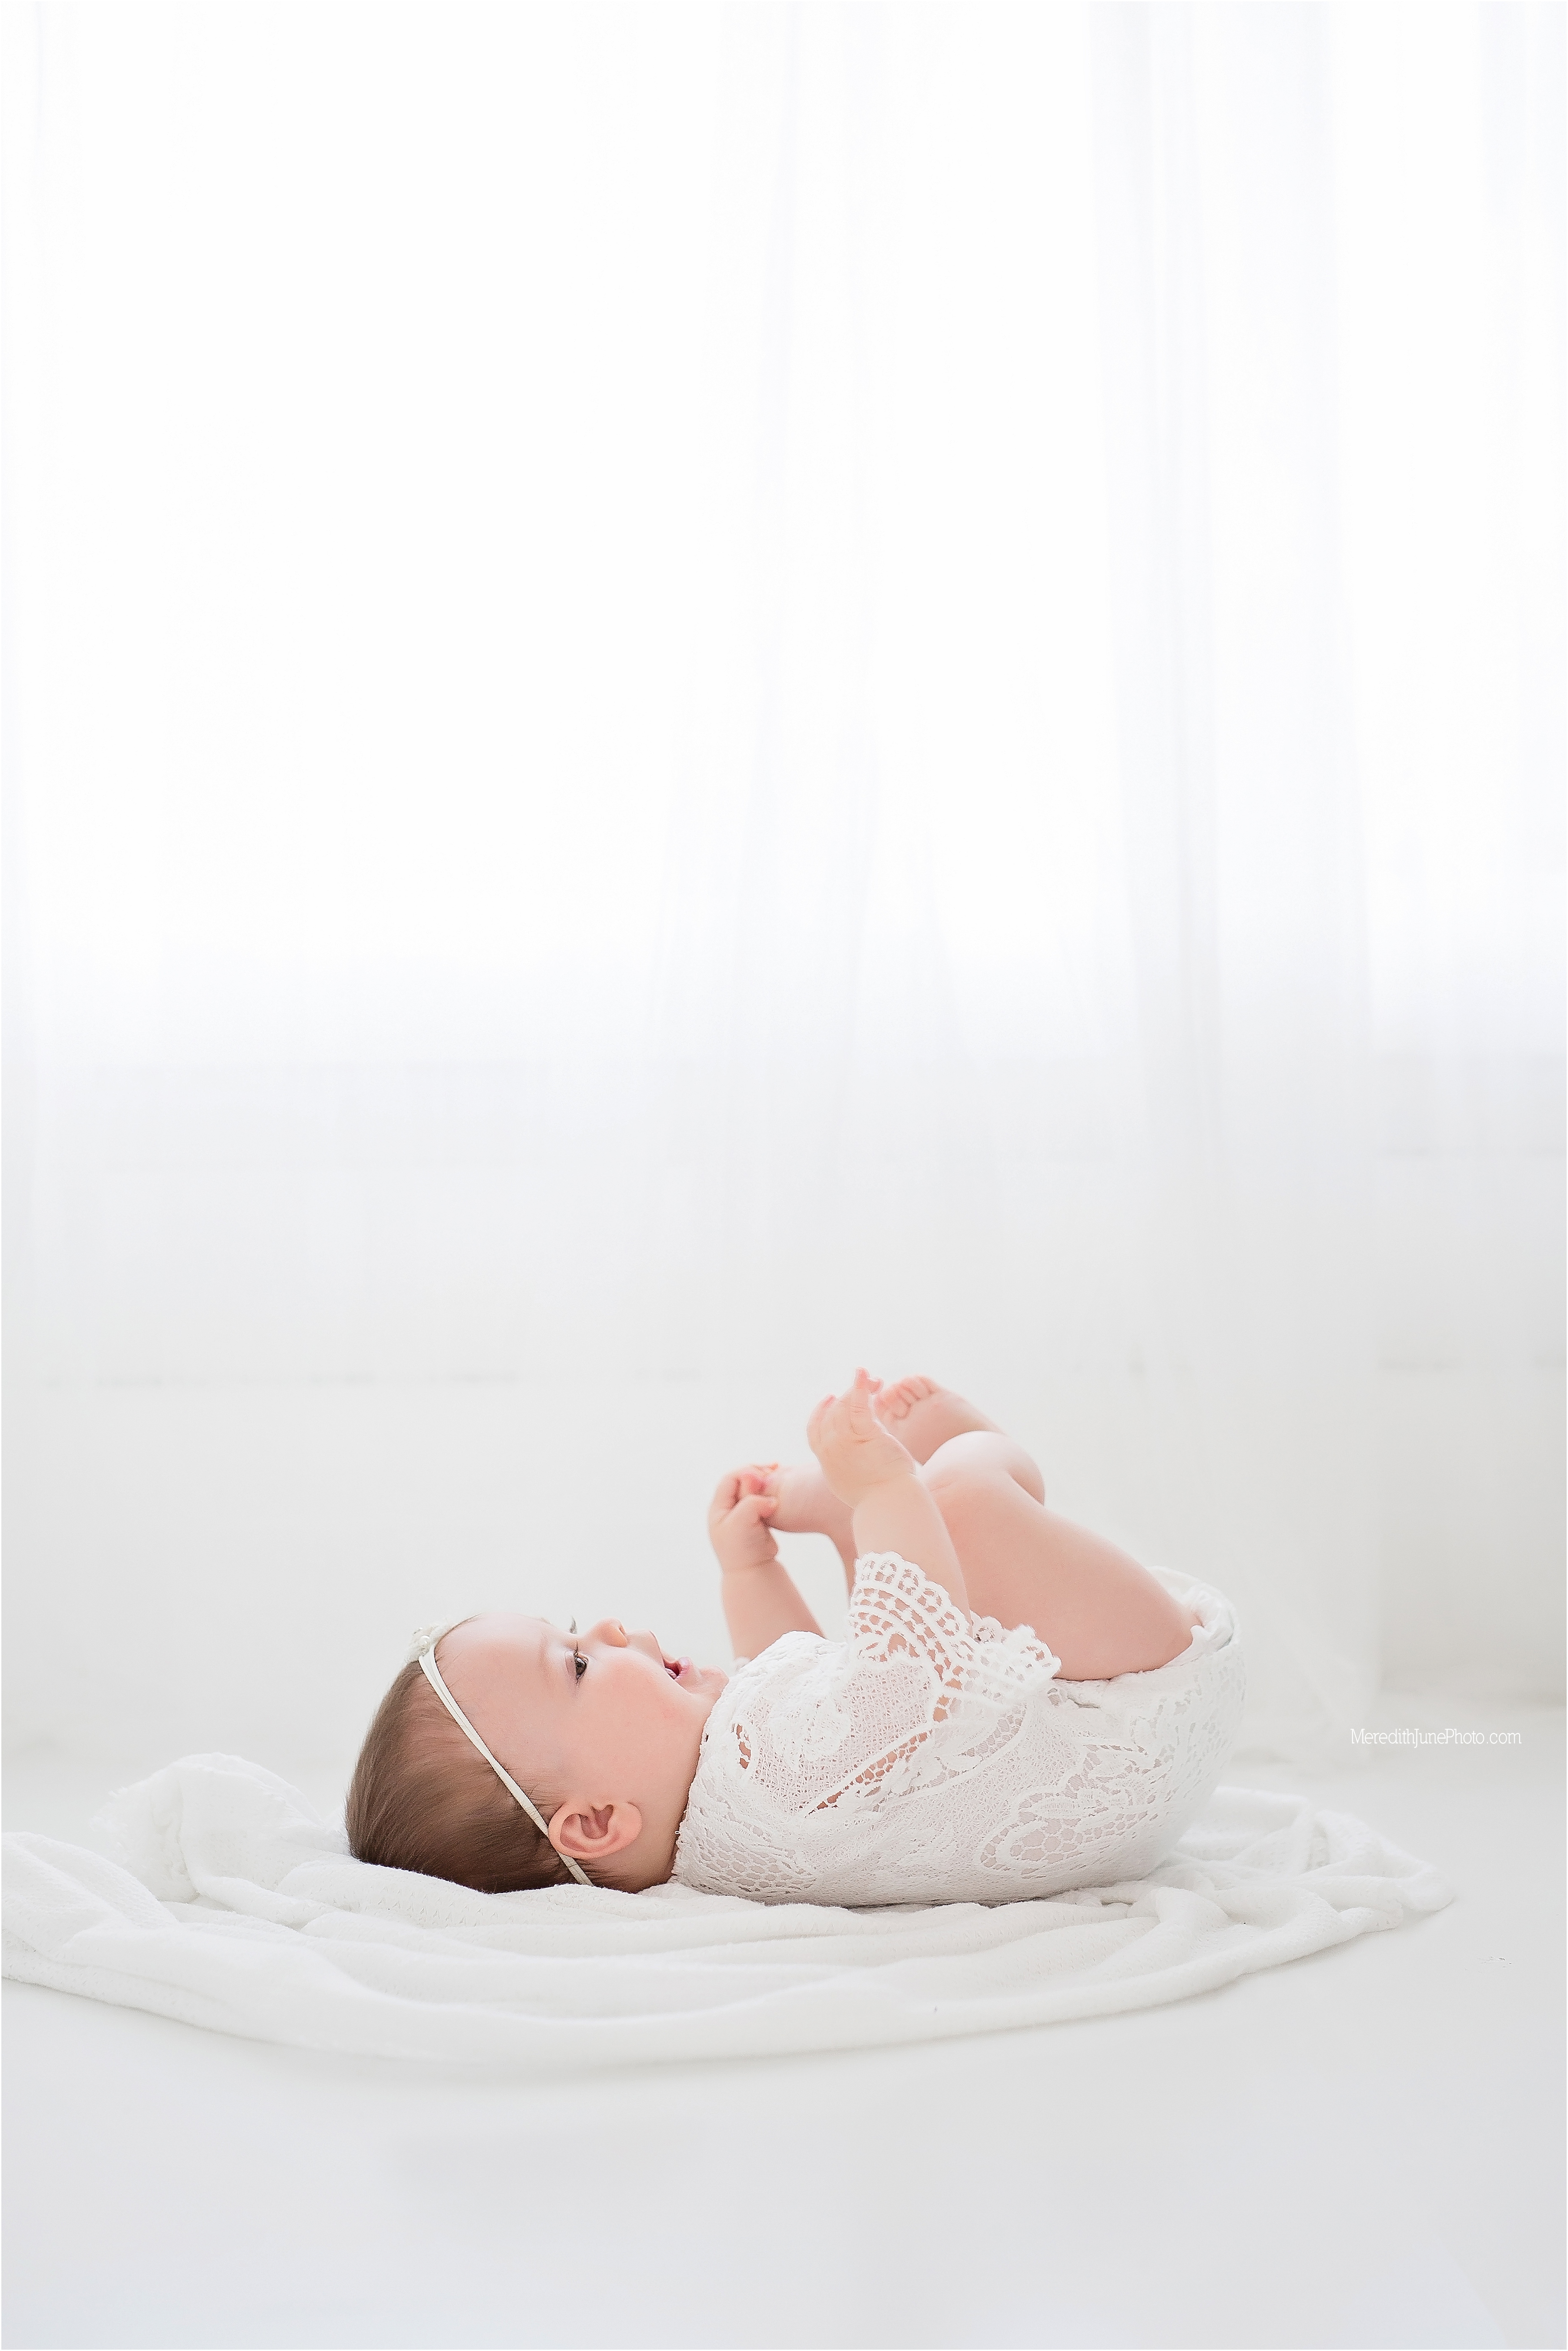 Bright and airy milestone session for baby girl